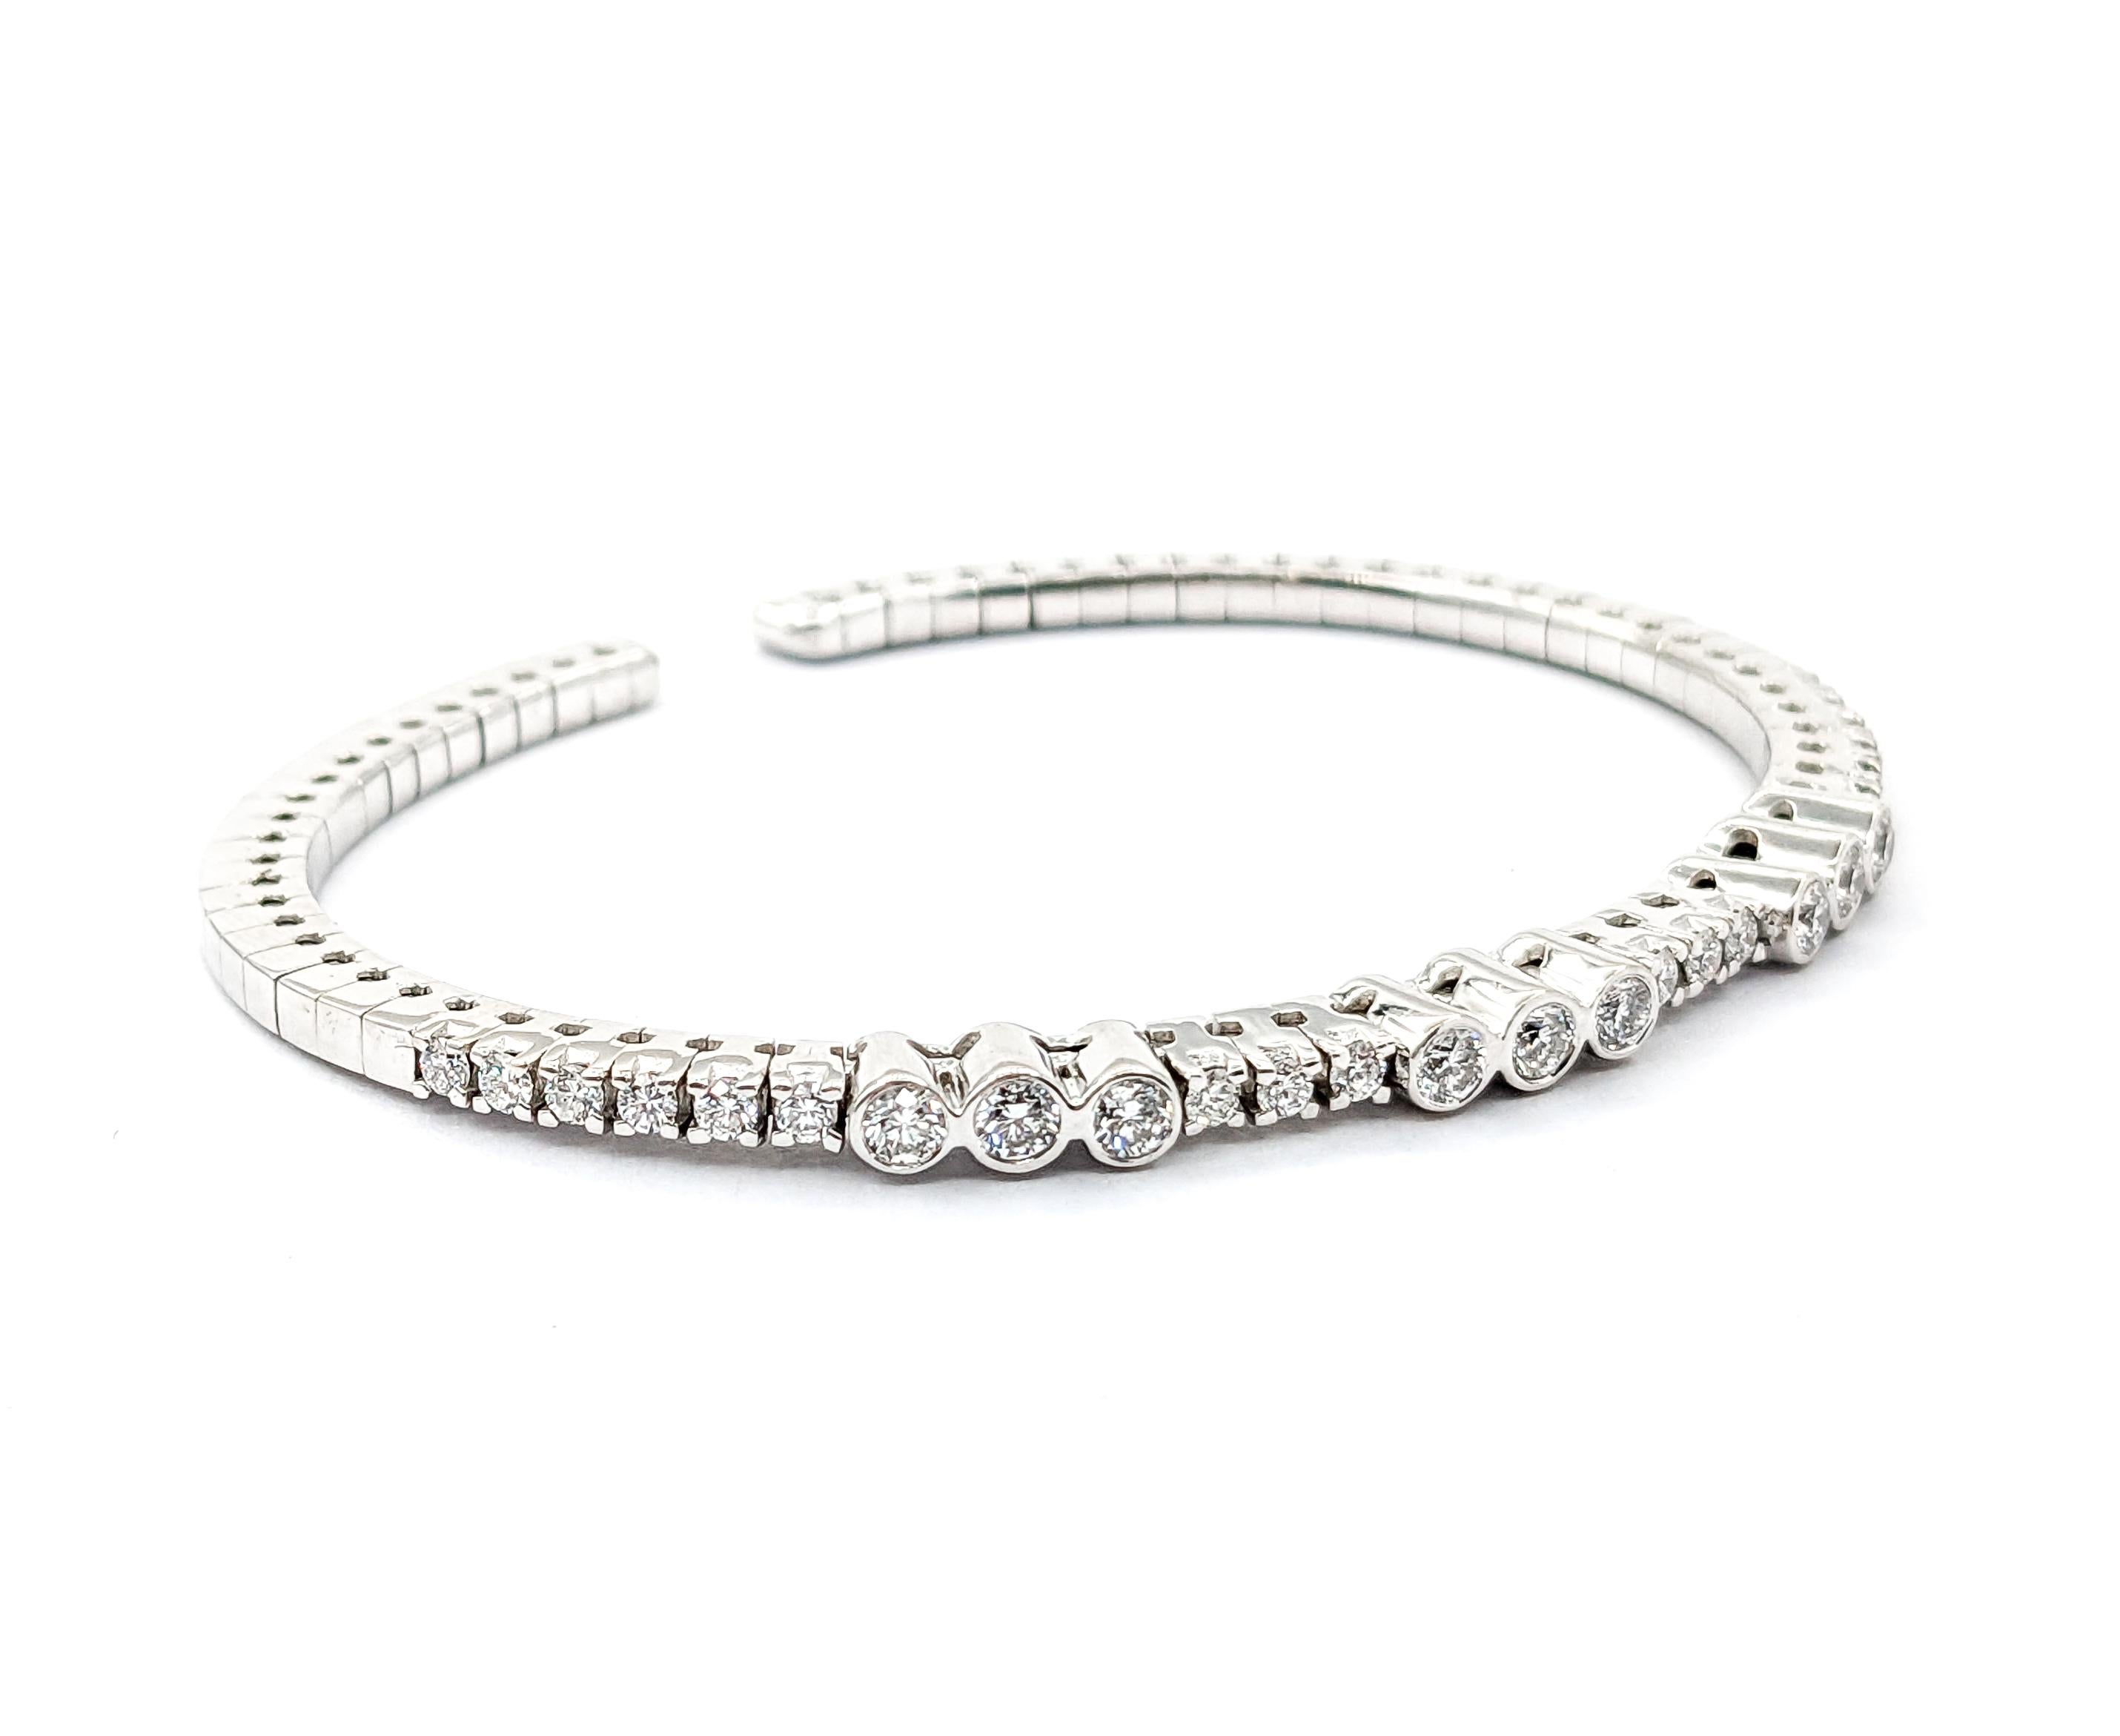 1.0ctw Diamond Flexible Bangle Bracelet In White Gold

This stunning Flexible Bangle Bracelet is beautifully crafted in 18kt white gold, featuring a total of 1.00ctw of round diamonds. These diamonds are of VS clarity, displaying near colorless